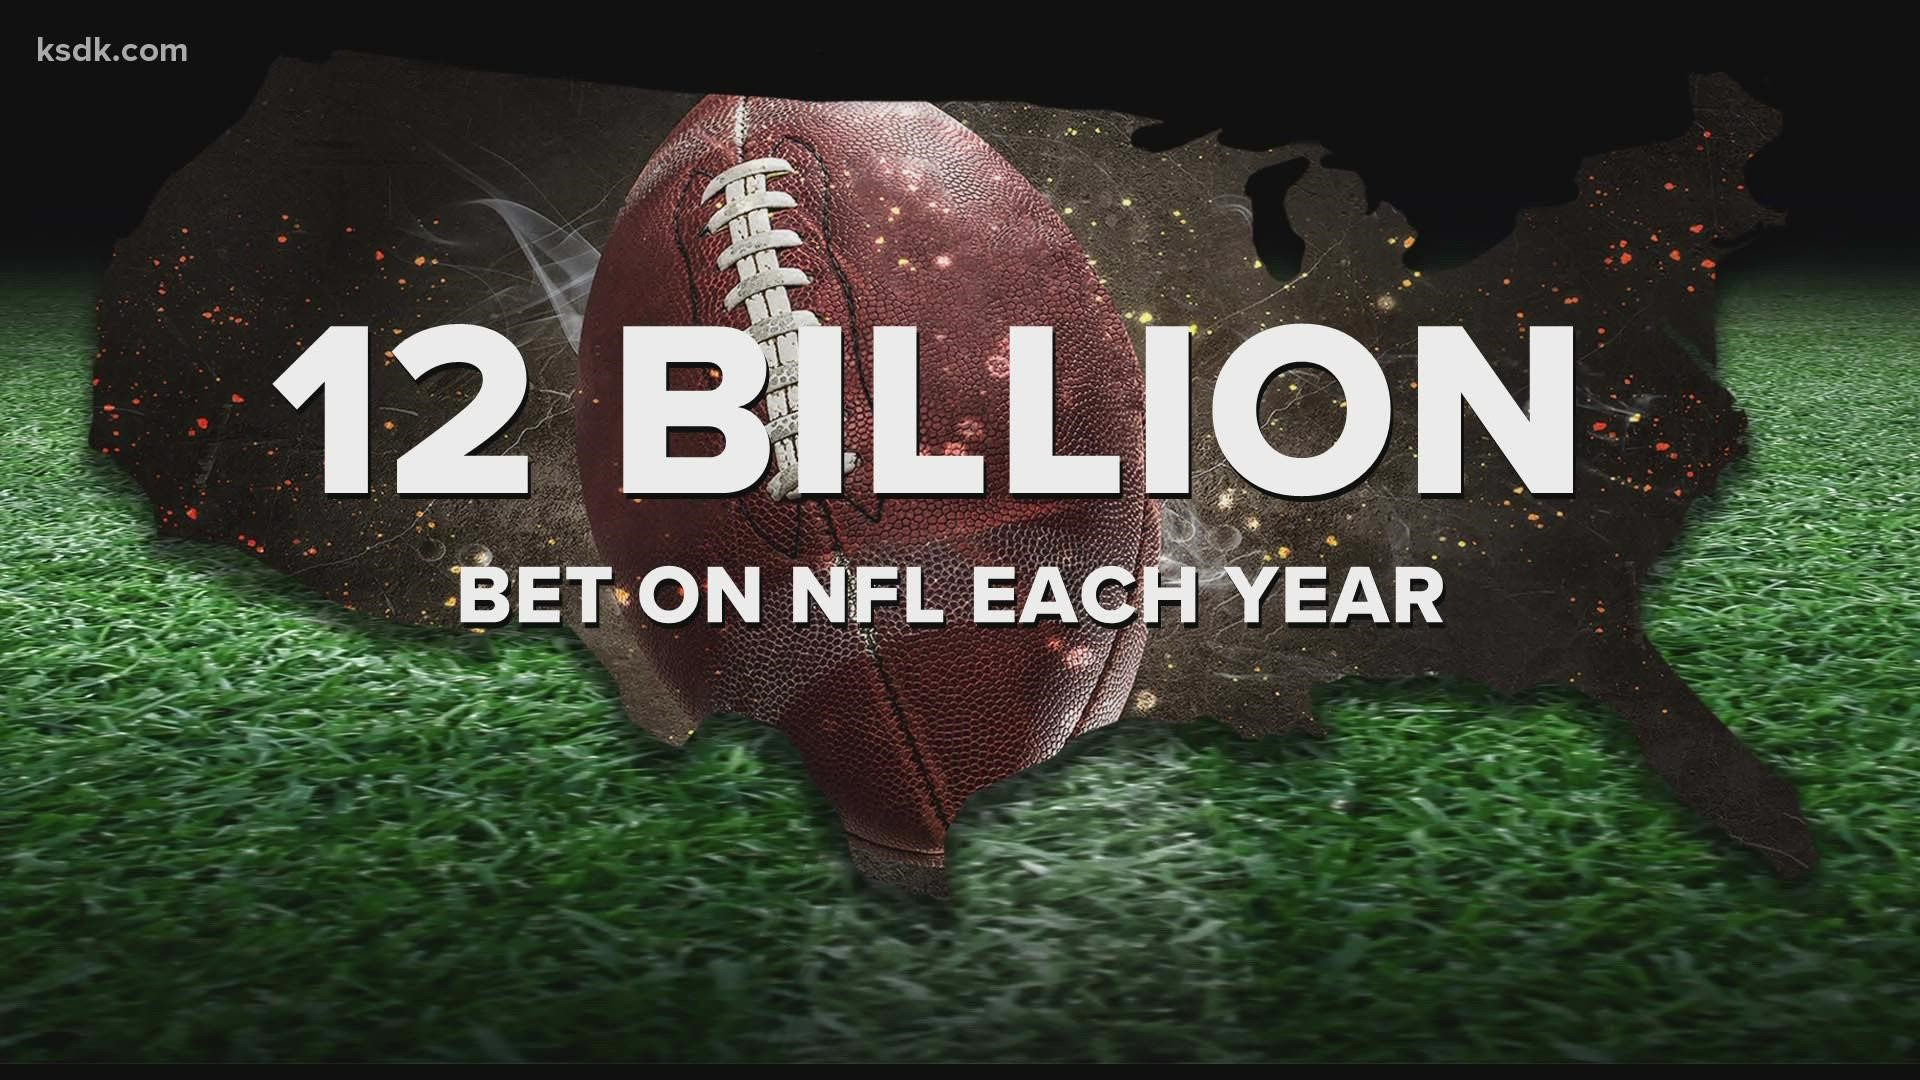 There's a lot of interest, and a lot of money in the NFL playoffs.